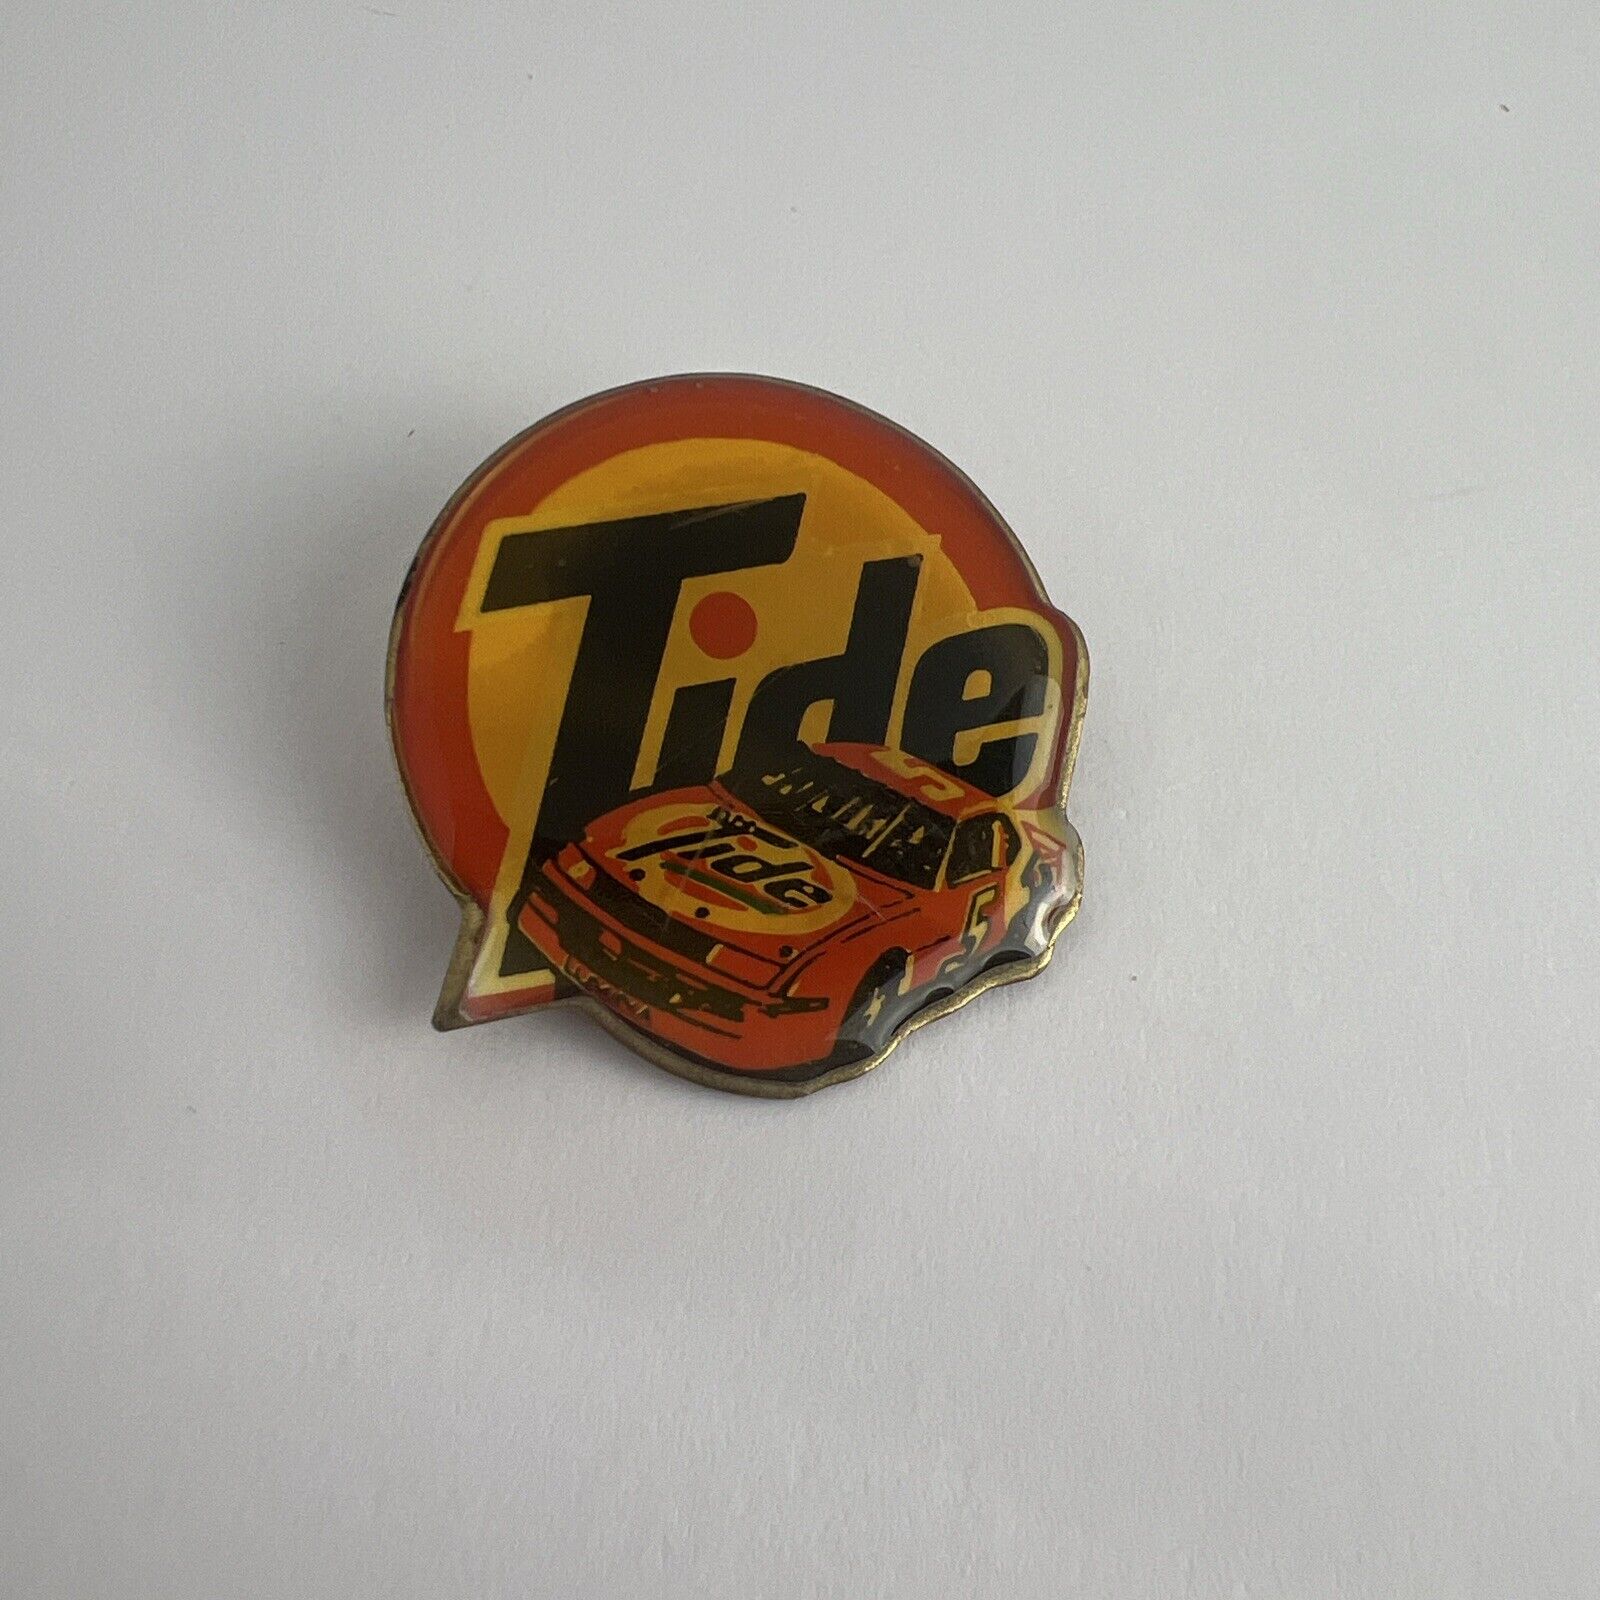 Vintage Tide Race Car Pin no date listed